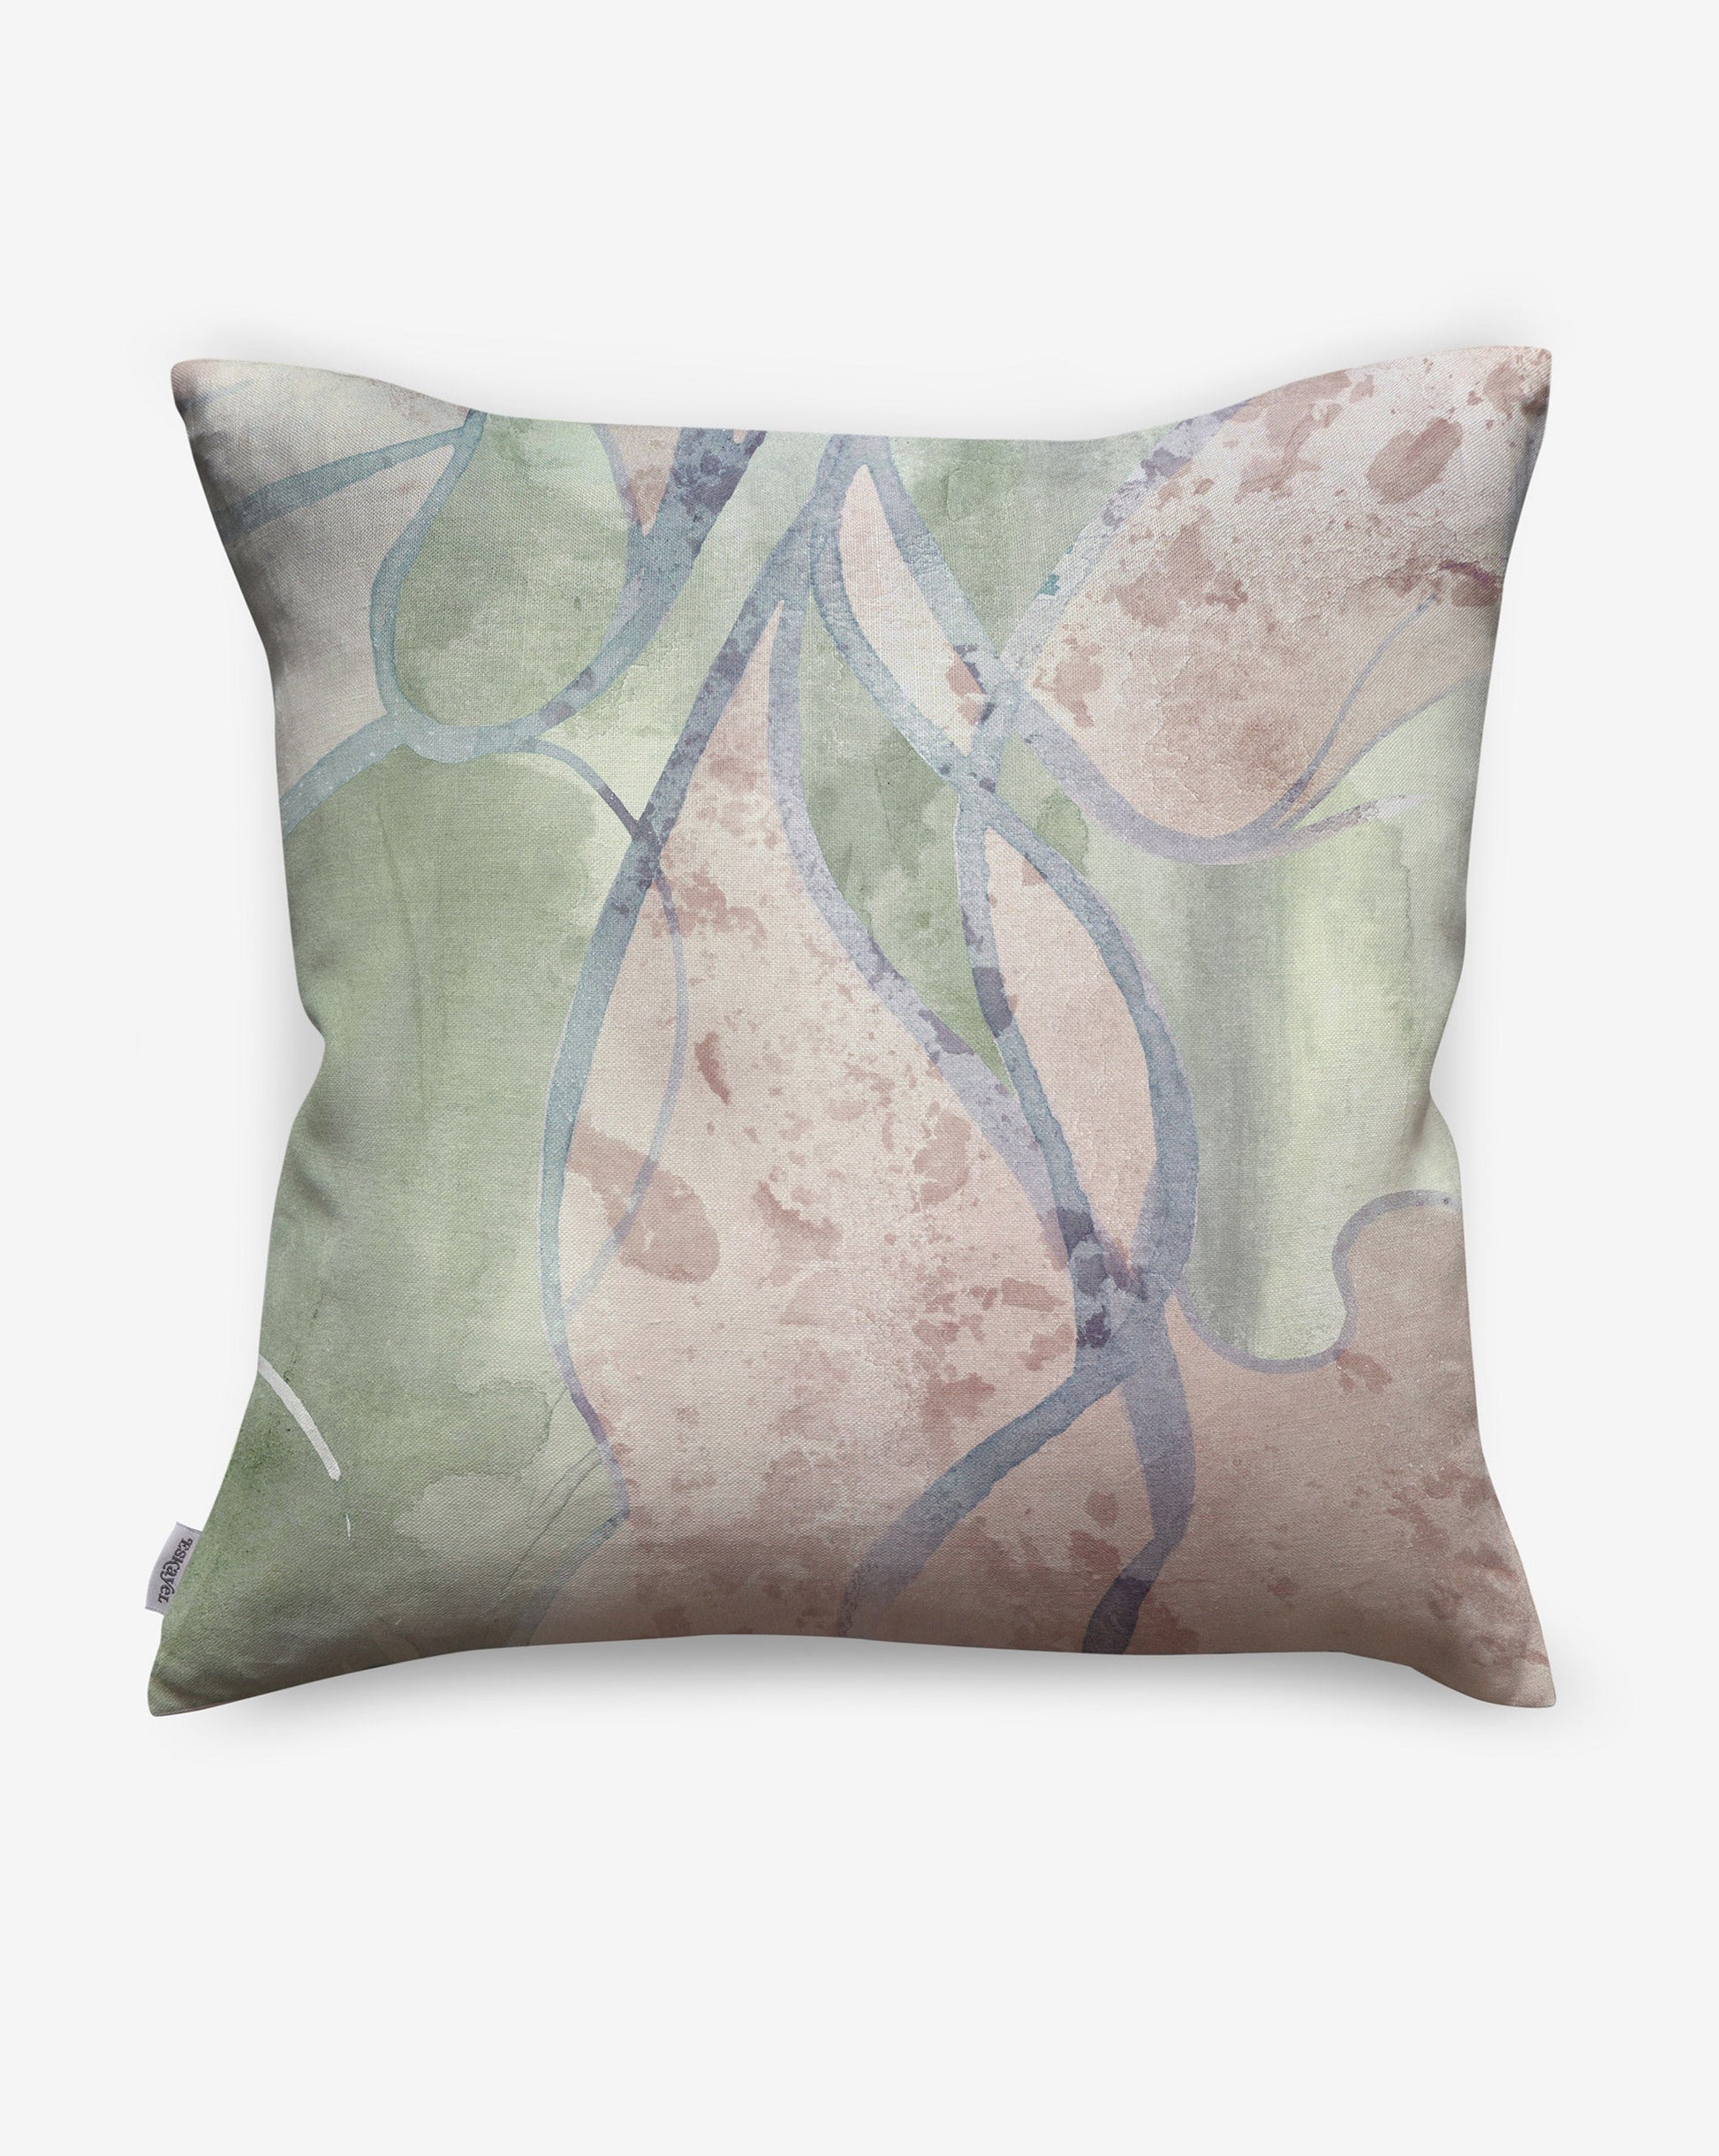 Eskayel Hibiscus Lily linen pillows in Tourmaline feature green hues against beige.   